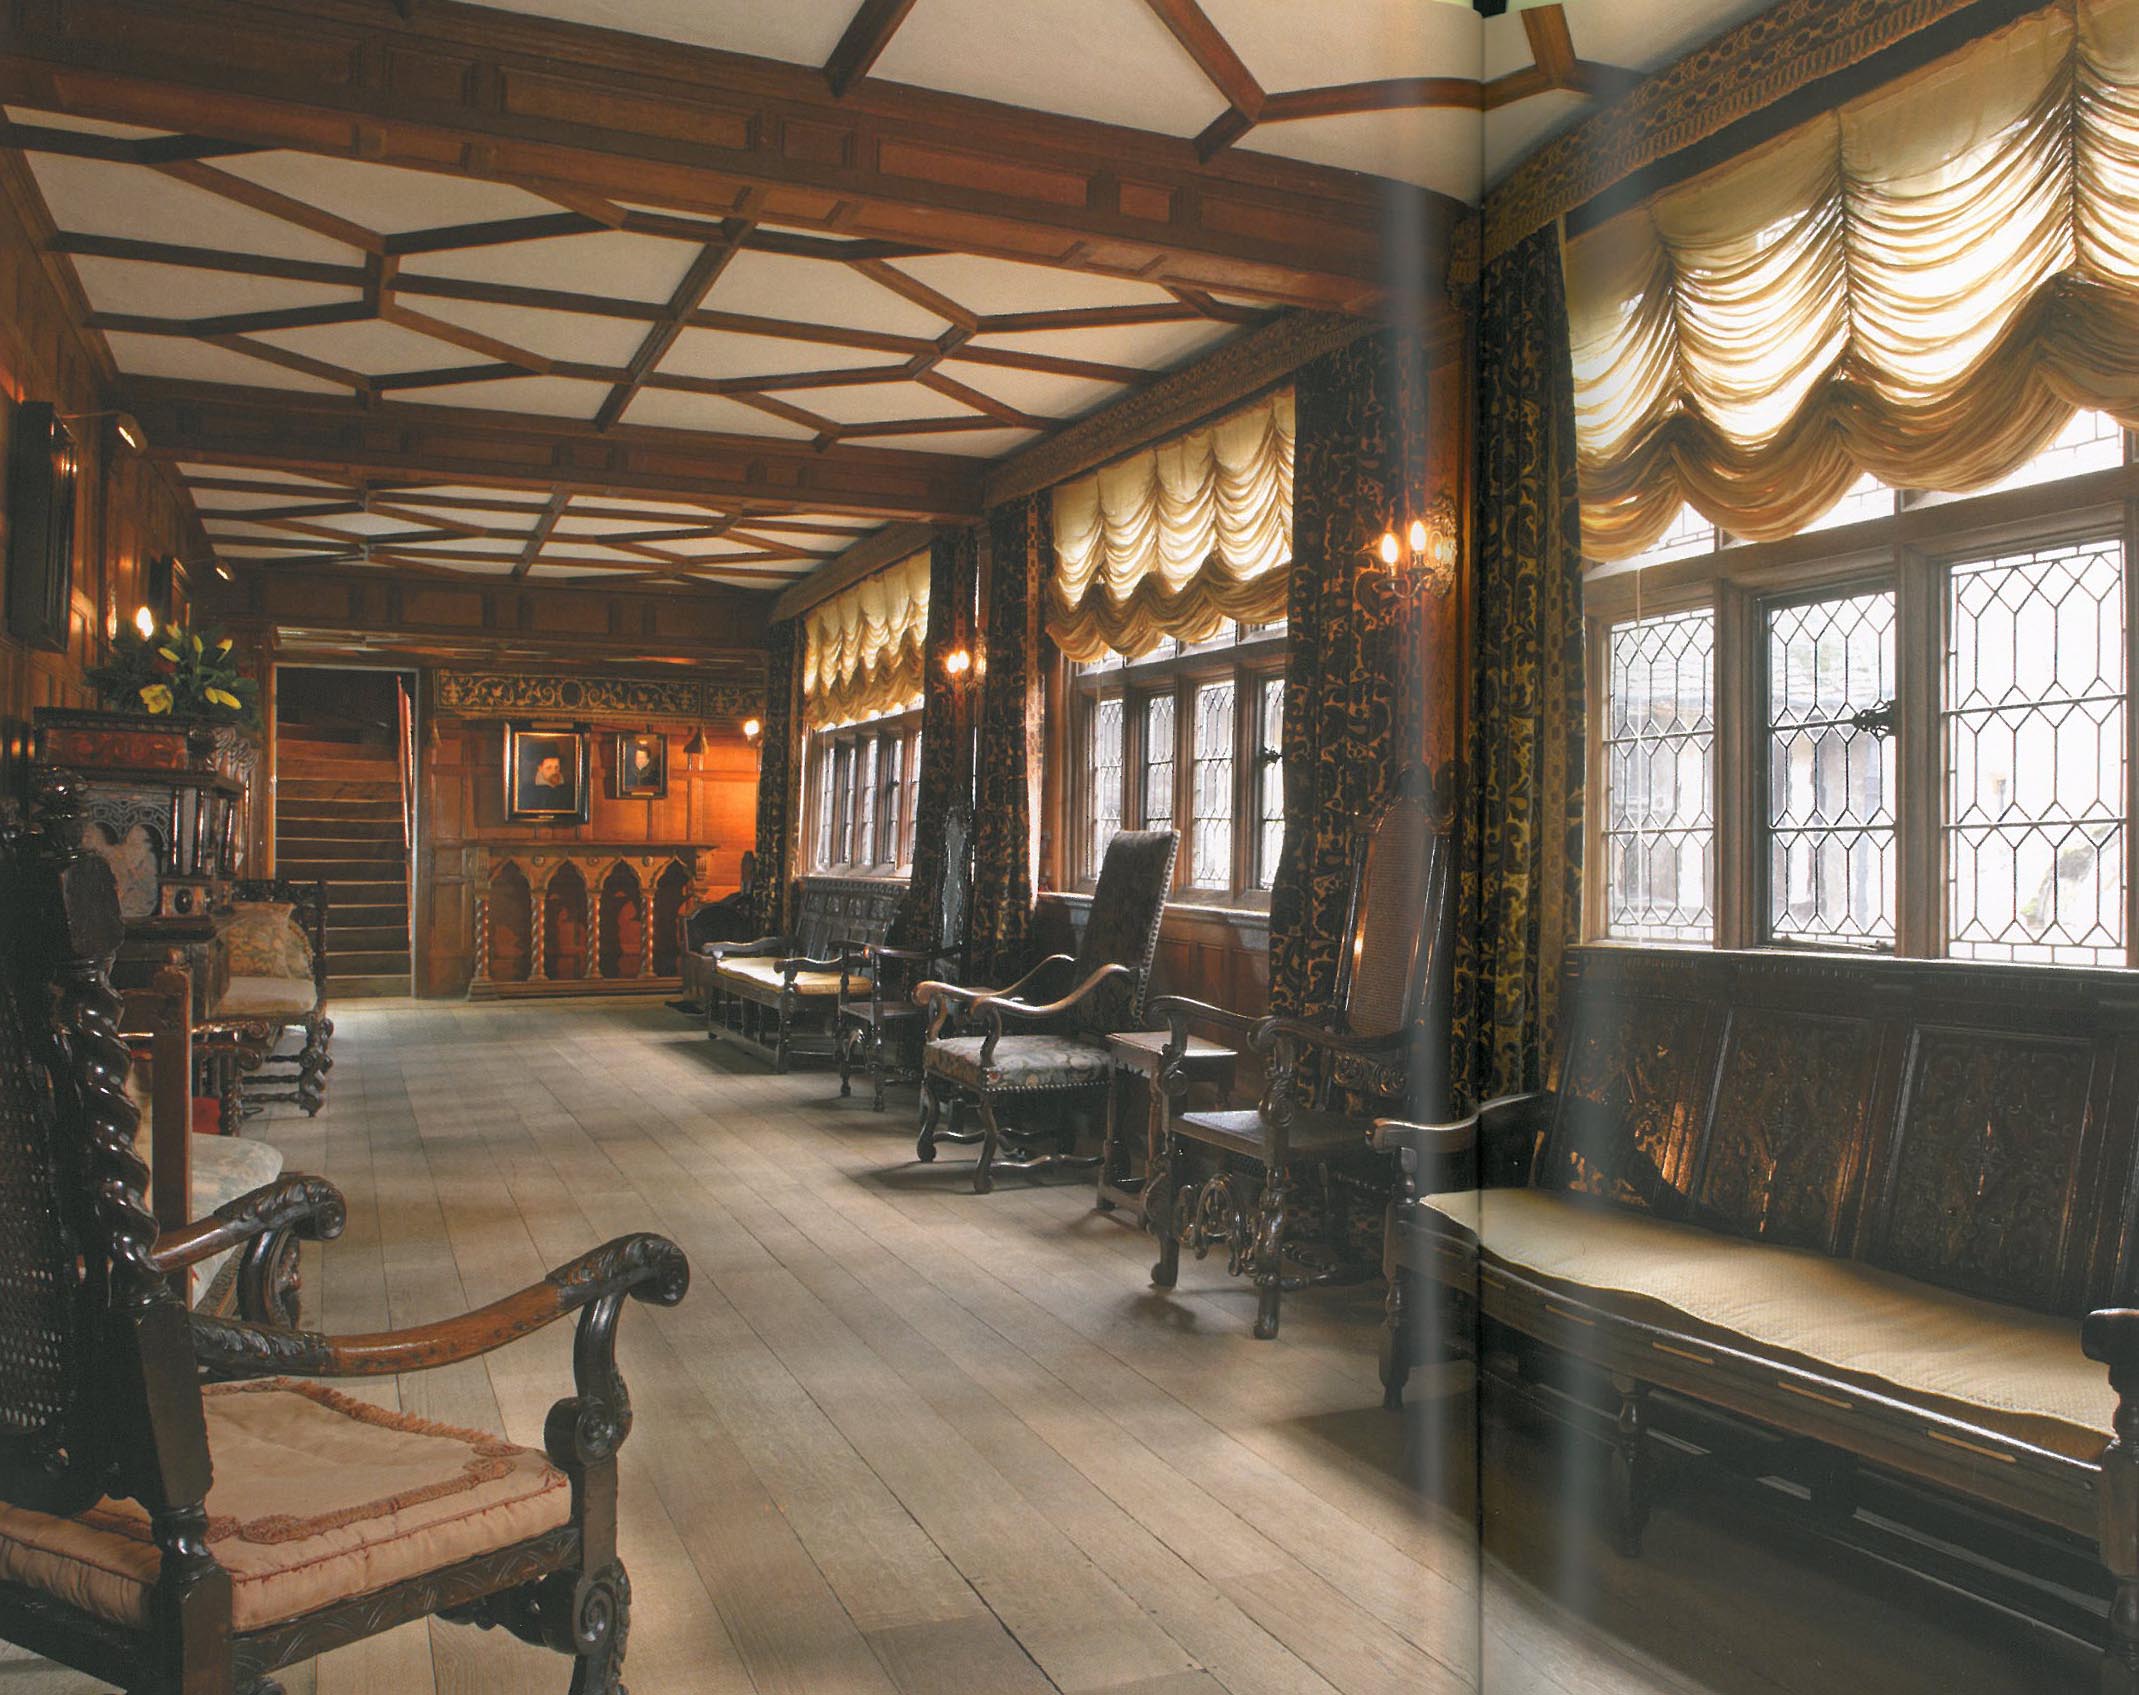 The Staircase Gallery is the smaller of two galleries in the Castle and was created in 1506 by Thomas Bullen over the Entrance Hall to give access between the two wings of the house and his newly-built Long Gallery. Image courtesy of Hever Castle.